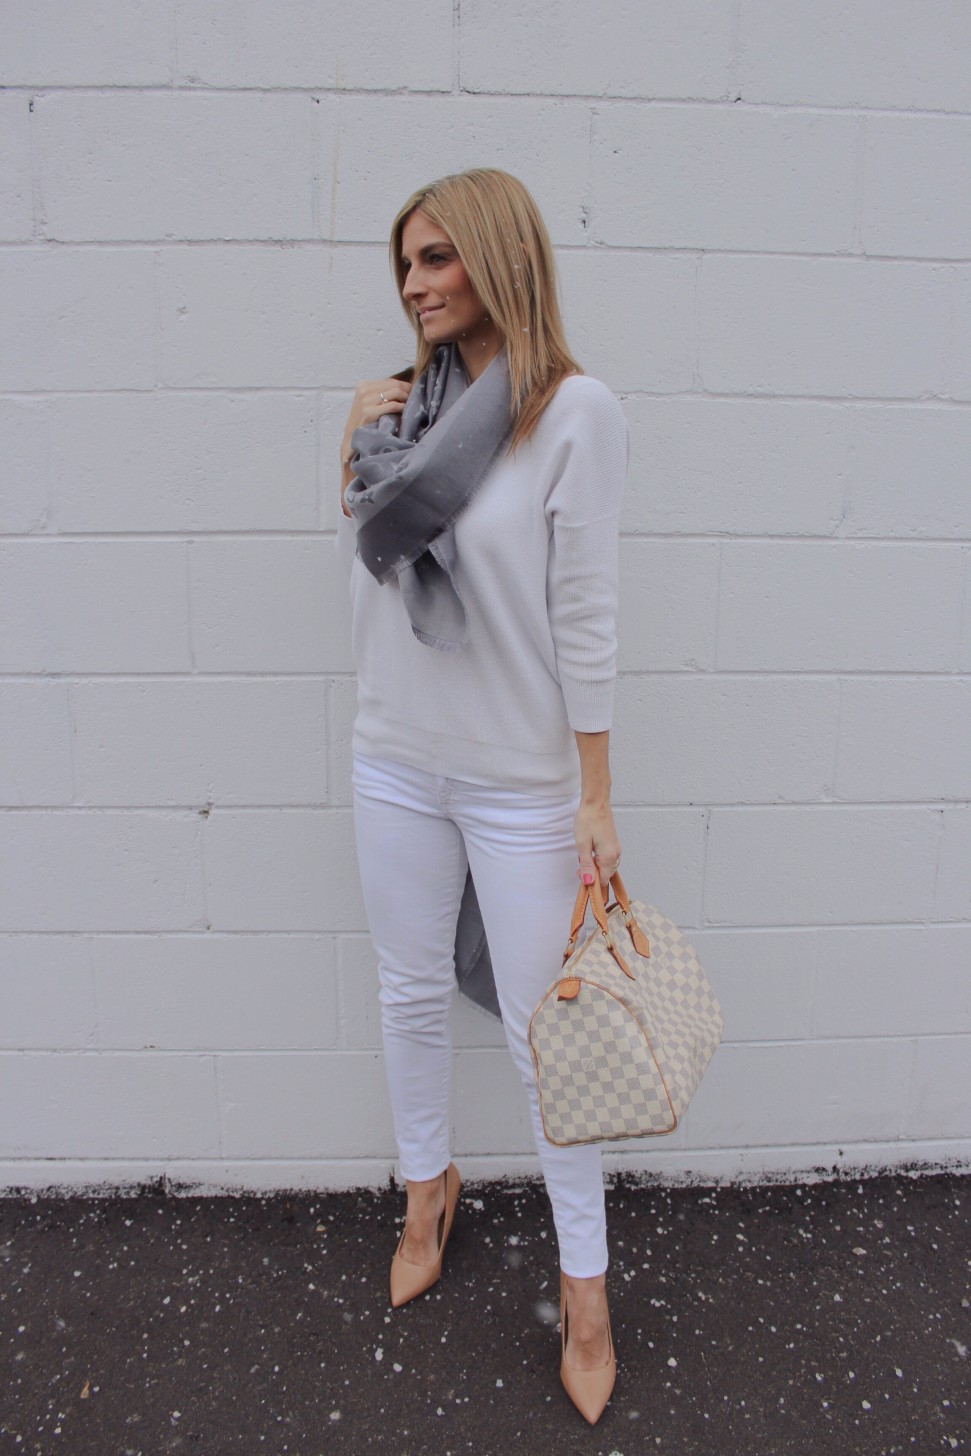 Winter White and Grey + Why I Try to Buy Classic Accessories